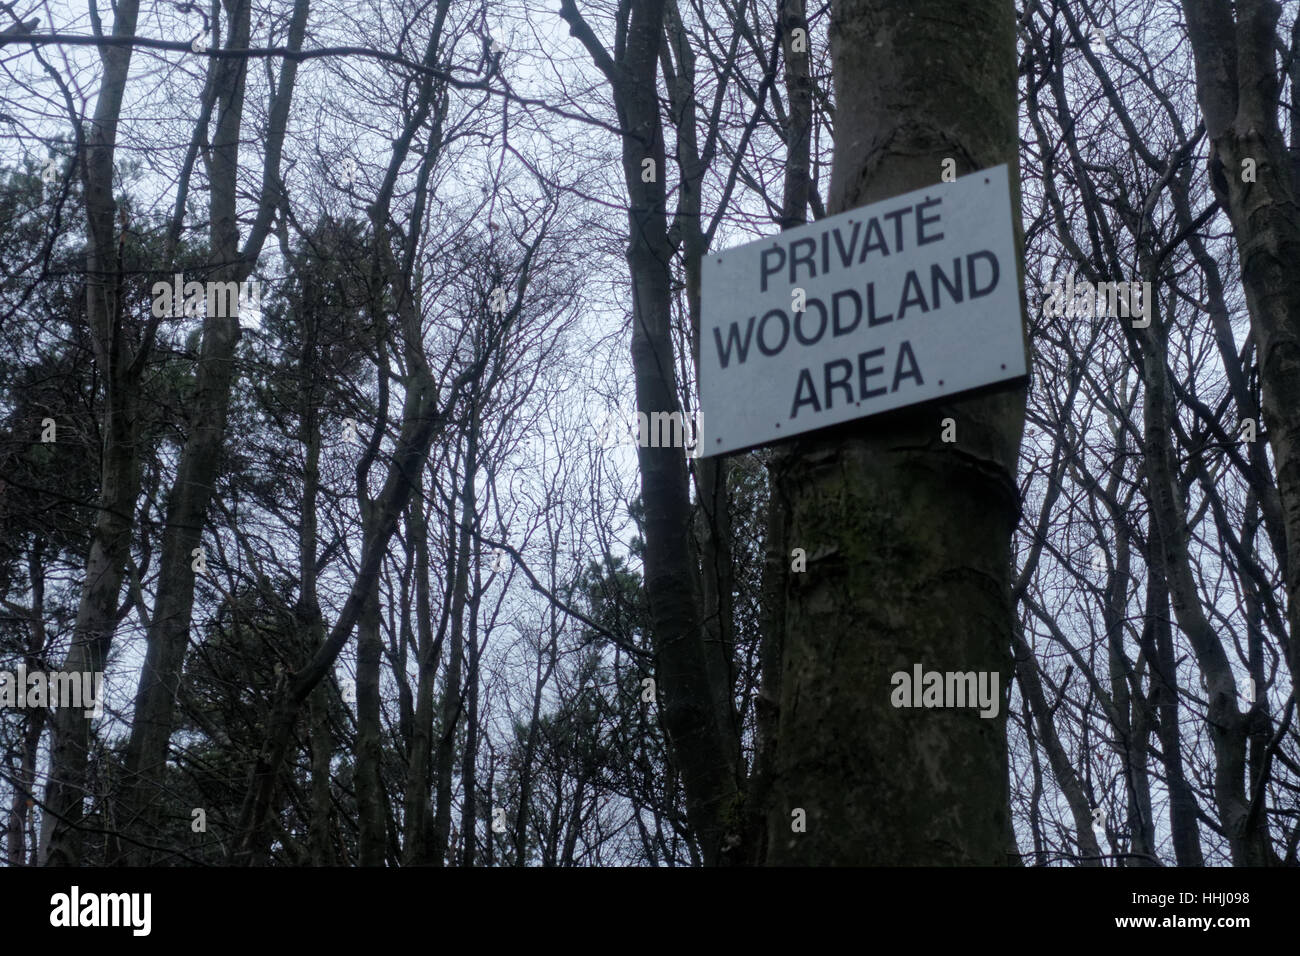 private woodland area sign in forest Stock Photo